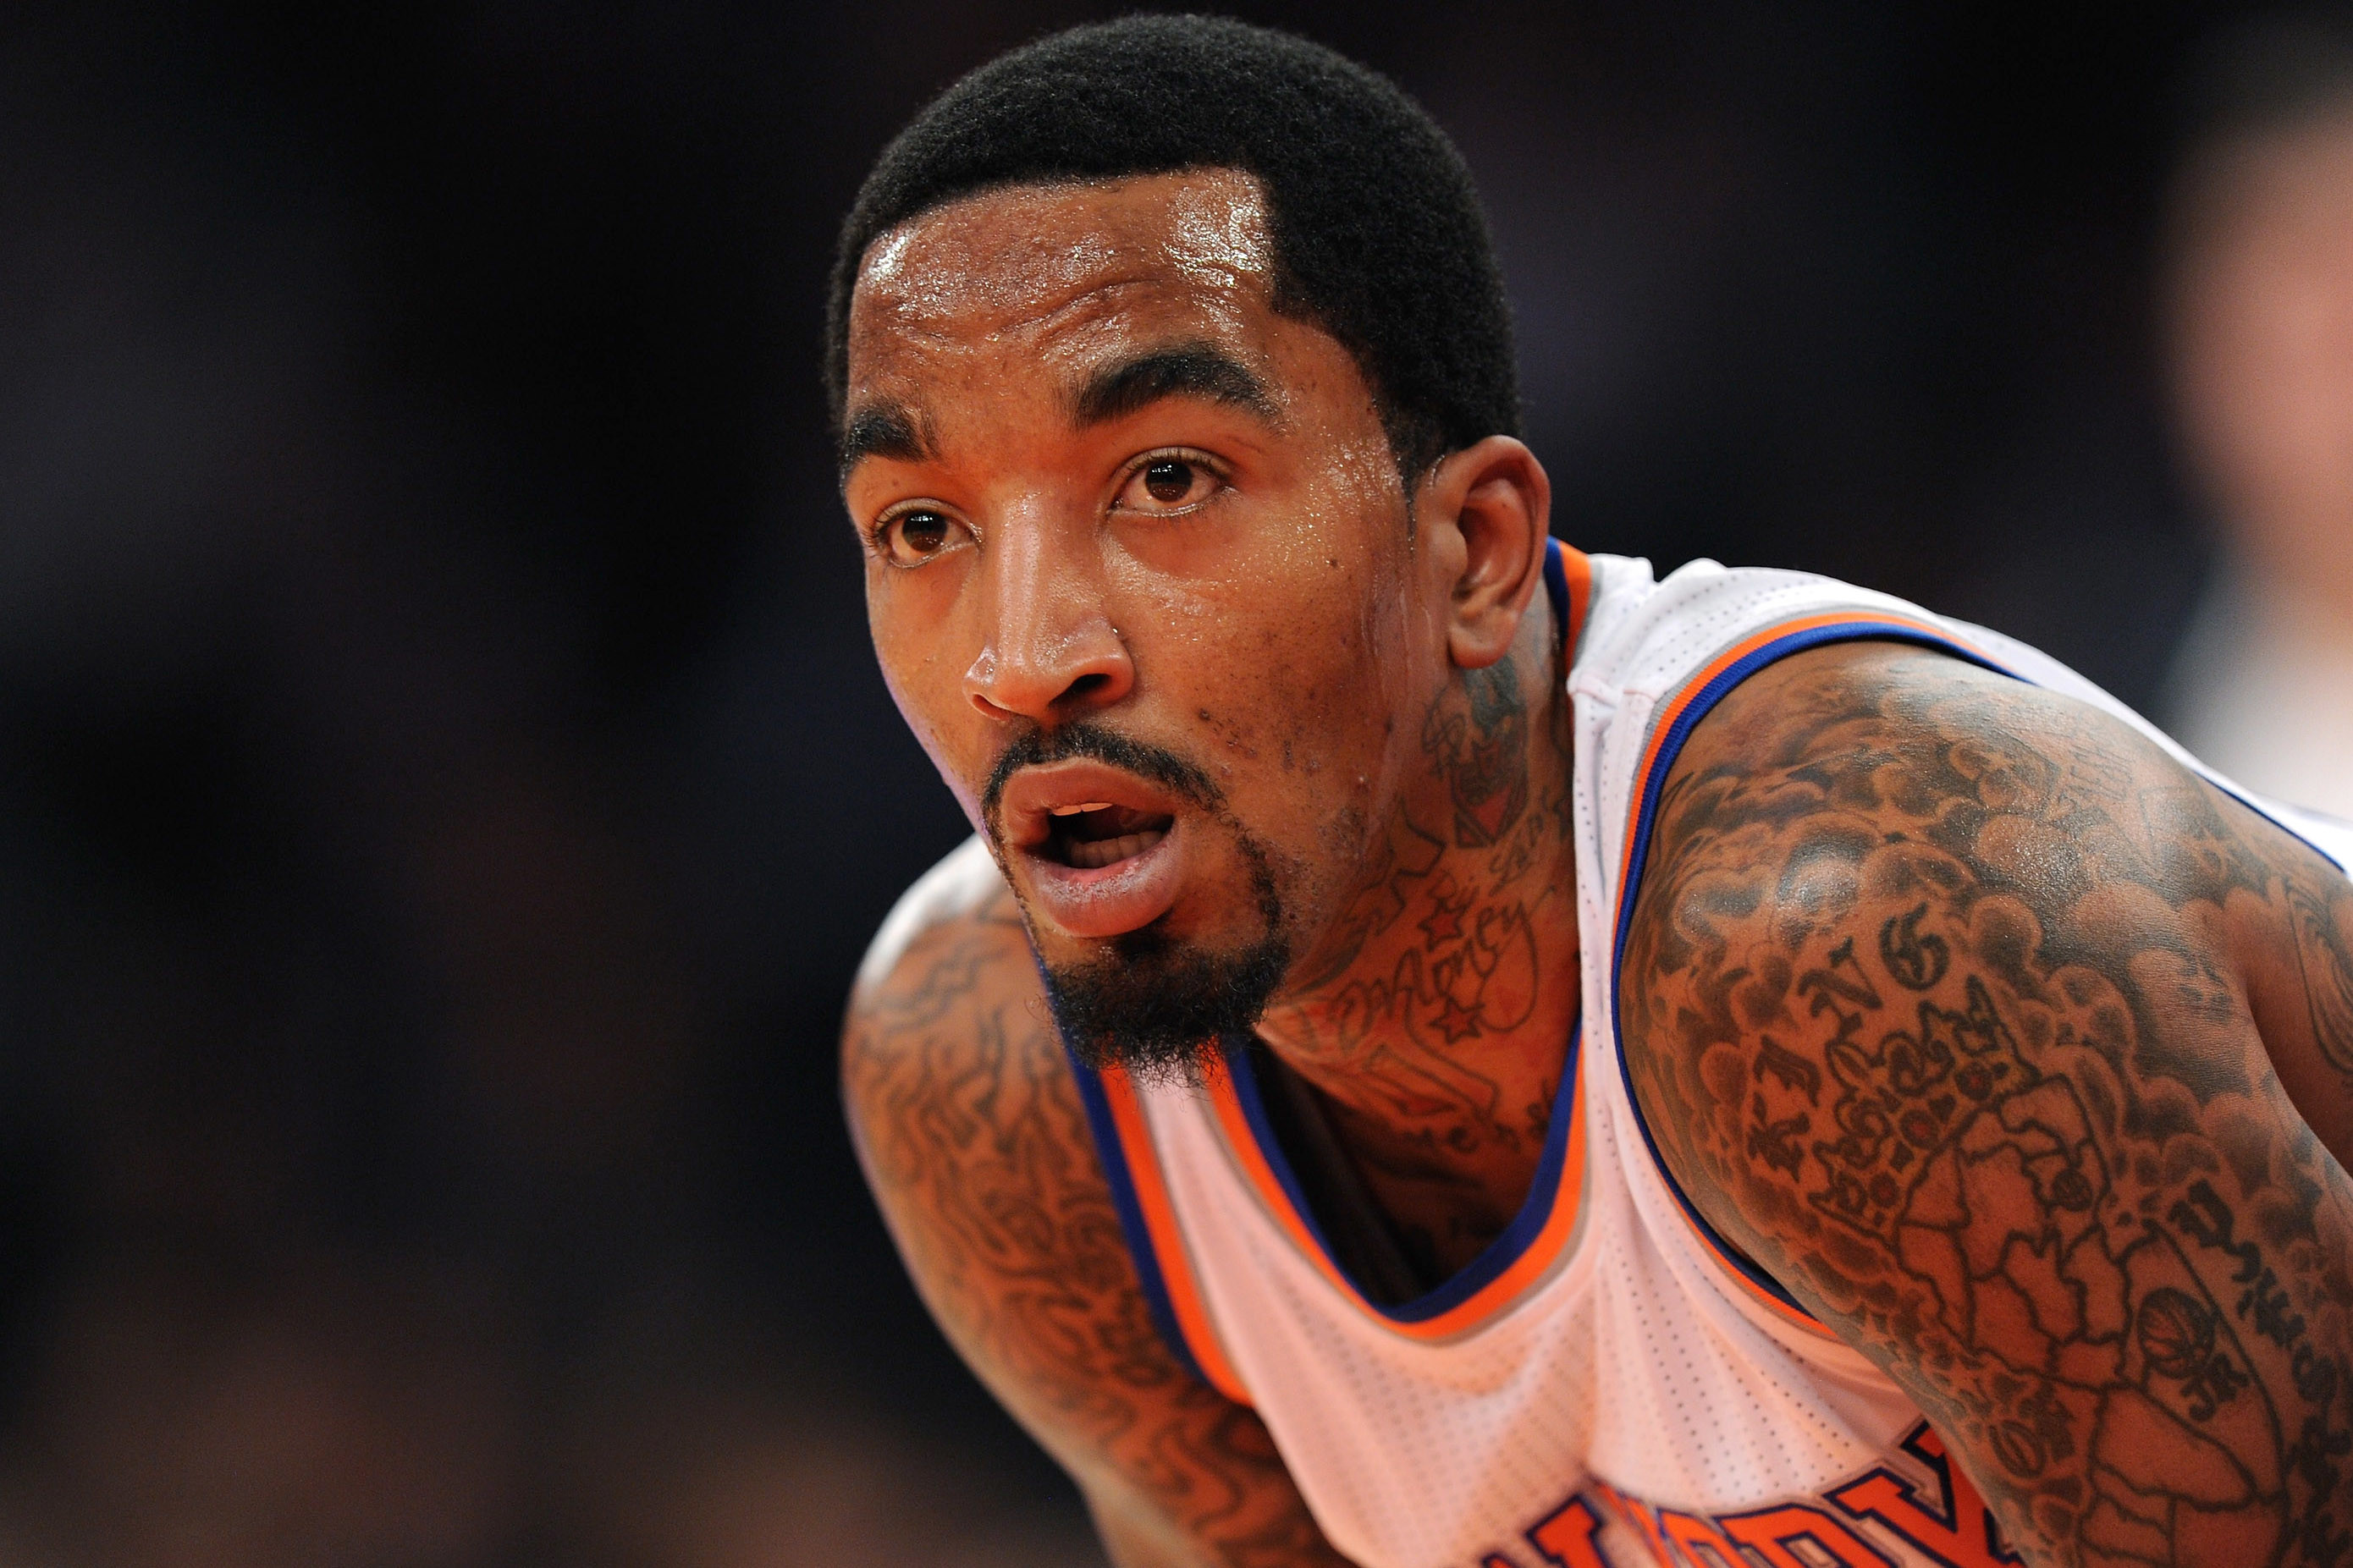 J. R. Smith 6th Player Of The Year 2013 1920×1200 Wallpaper